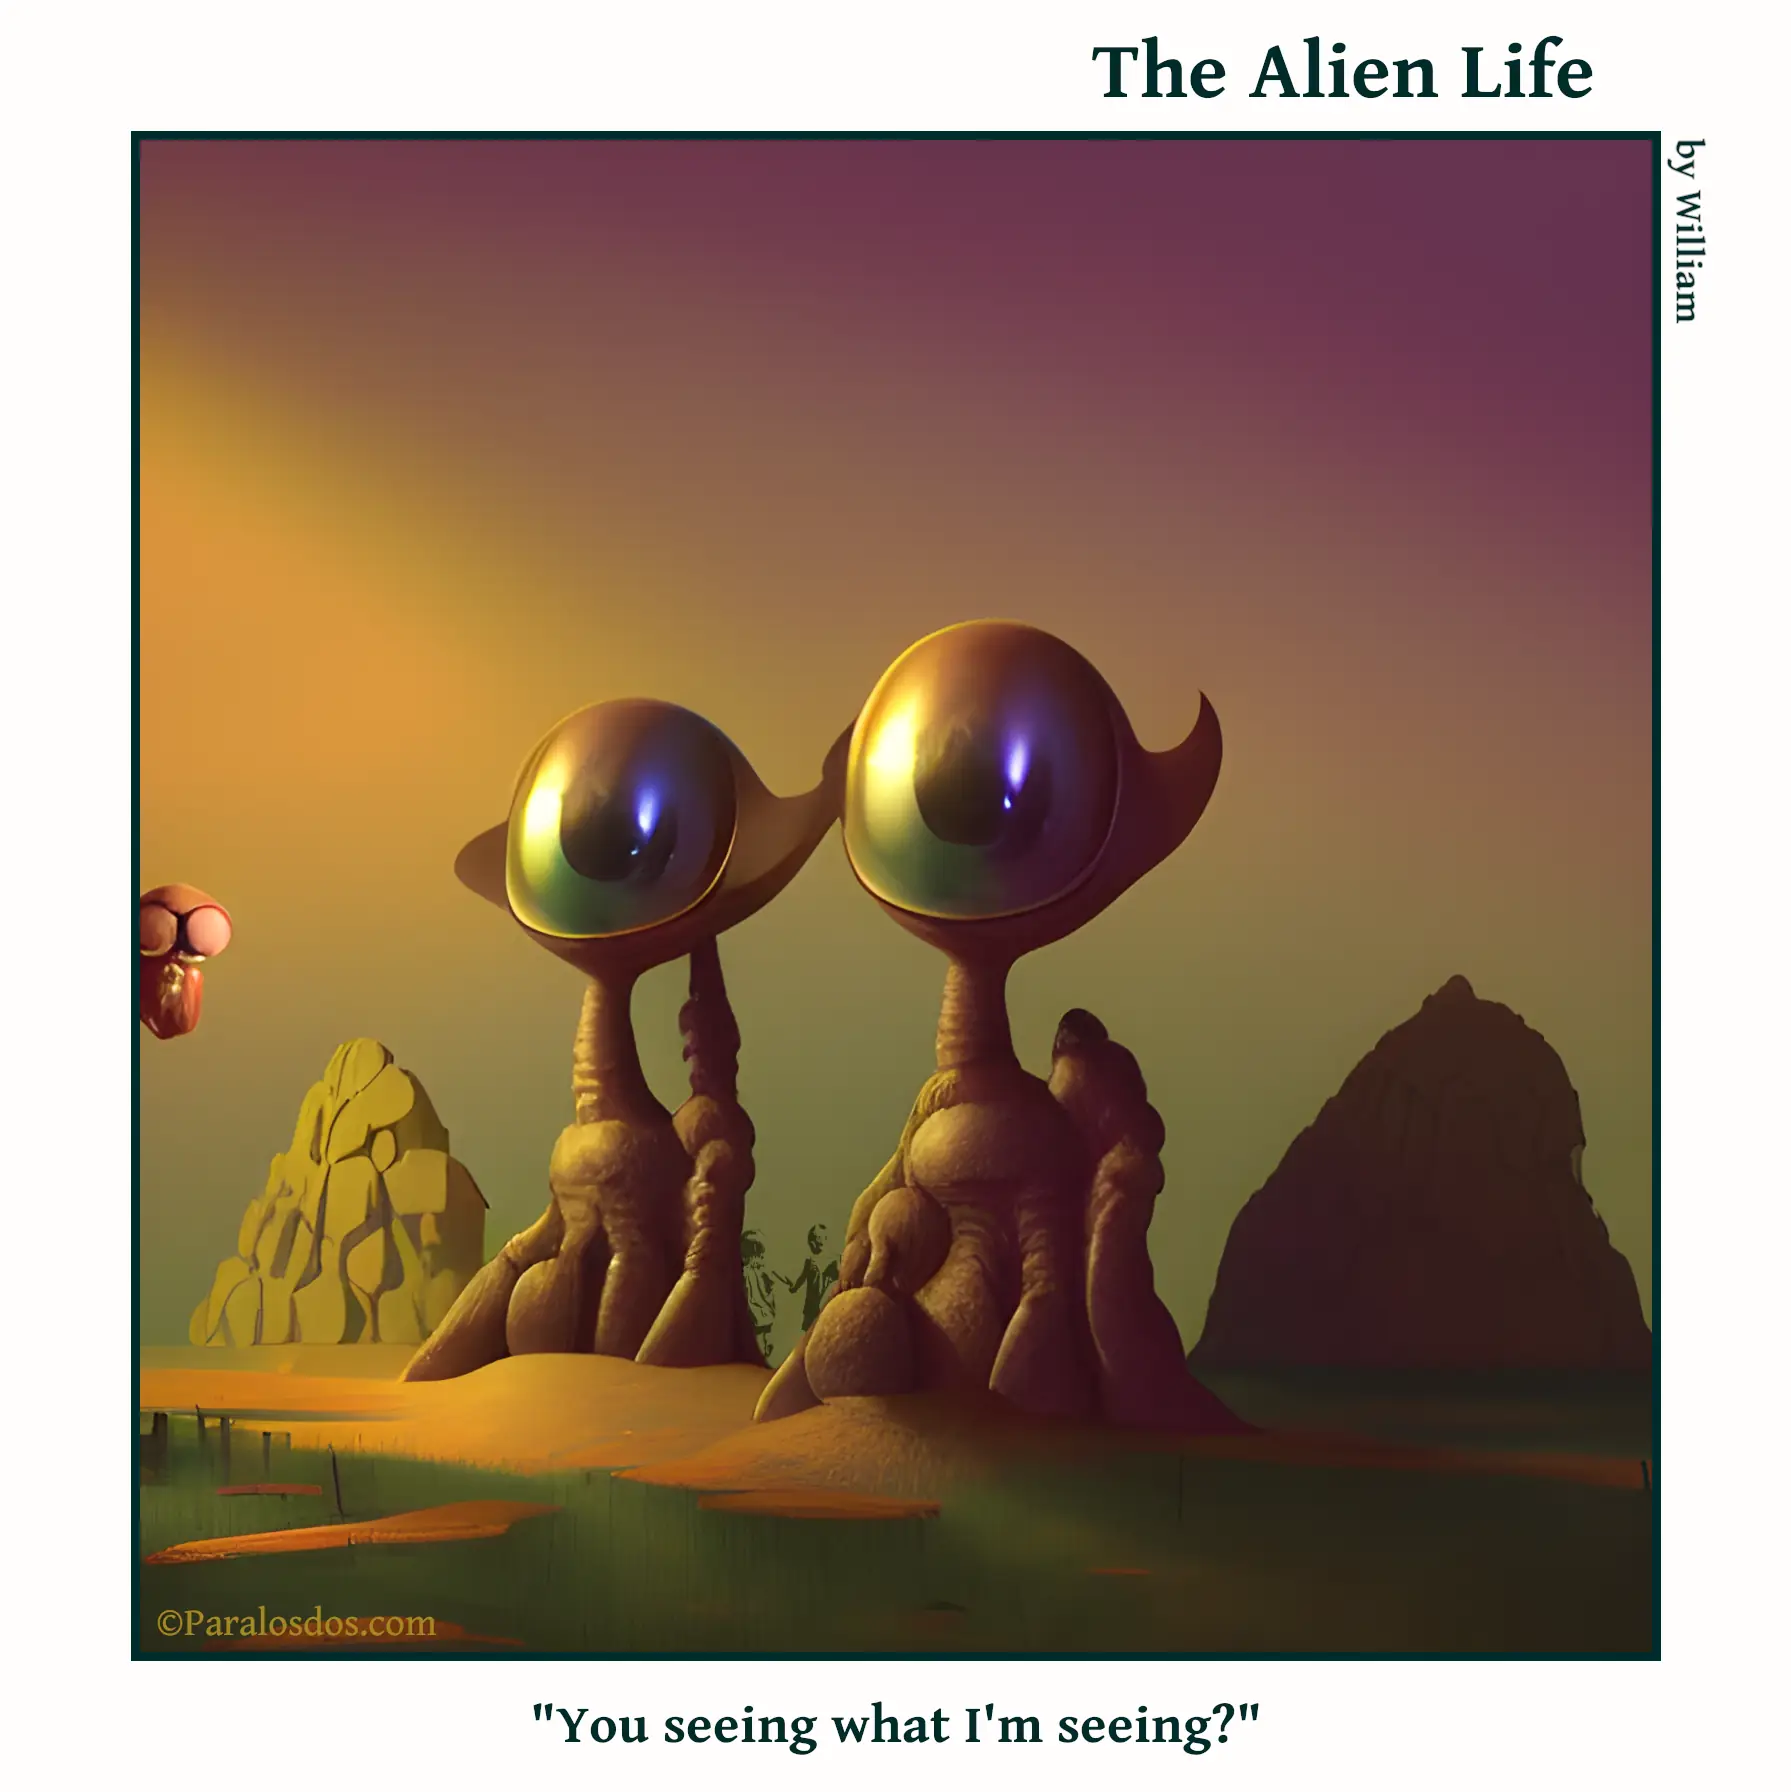 The Alien Life, one panel Comic. Two aliens with one humongous eye each are standing side by side looking at something weird. The caption reads: "You seeing what I'm seeing?"